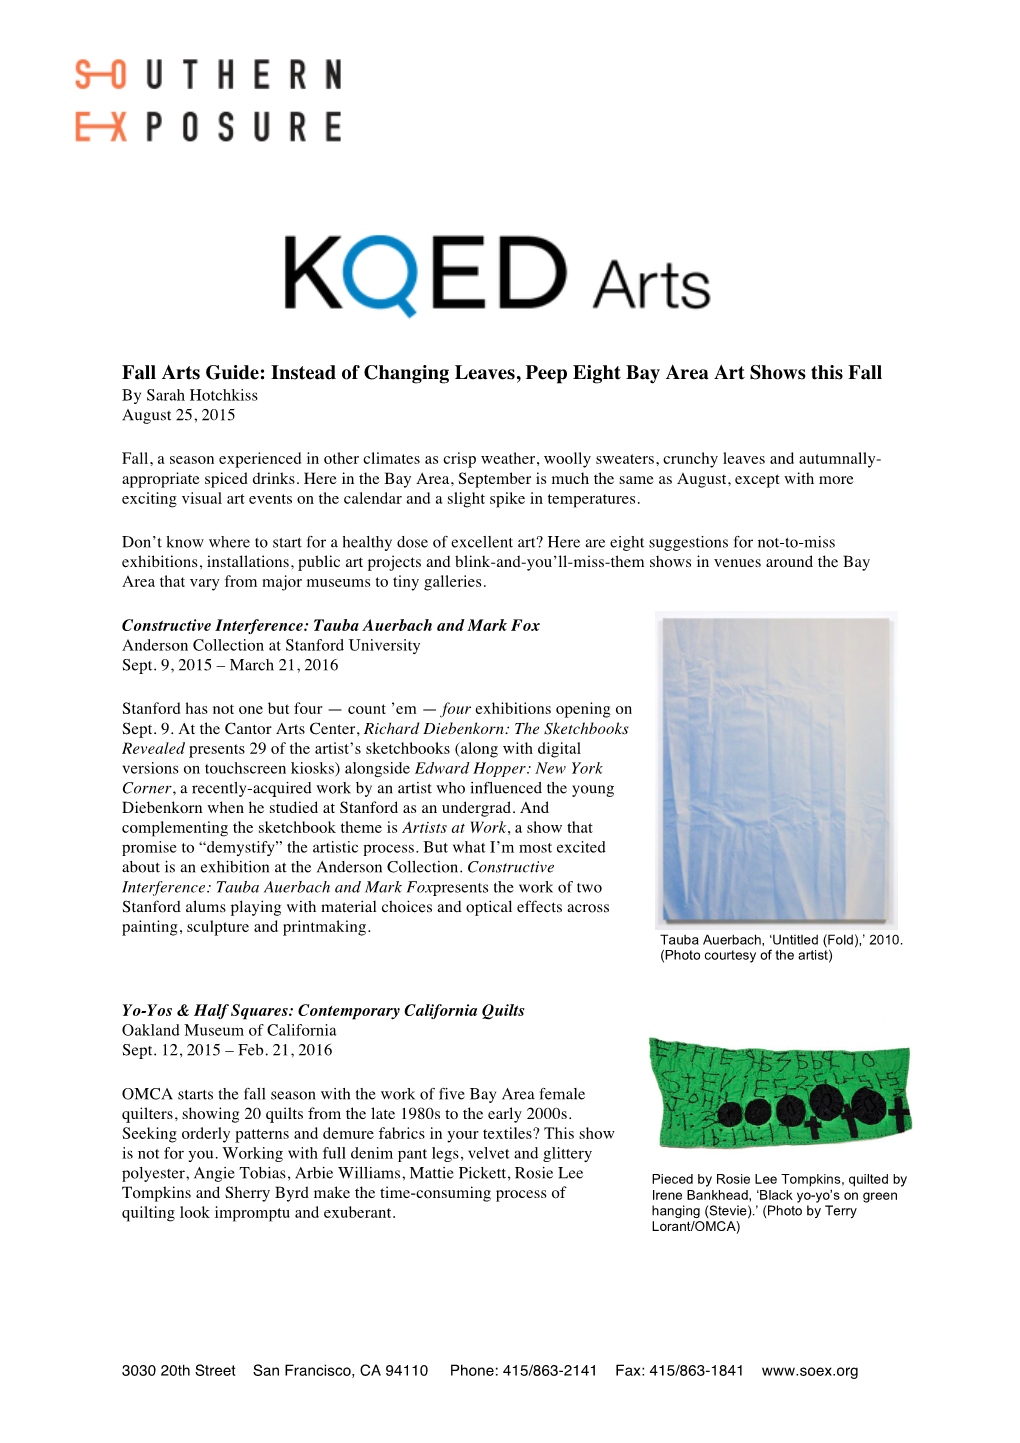 Fall Arts Guide: Instead of Changing Leaves, Peep Eight Bay Area Art Shows This Fall by Sarah Hotchkiss August 25, 2015